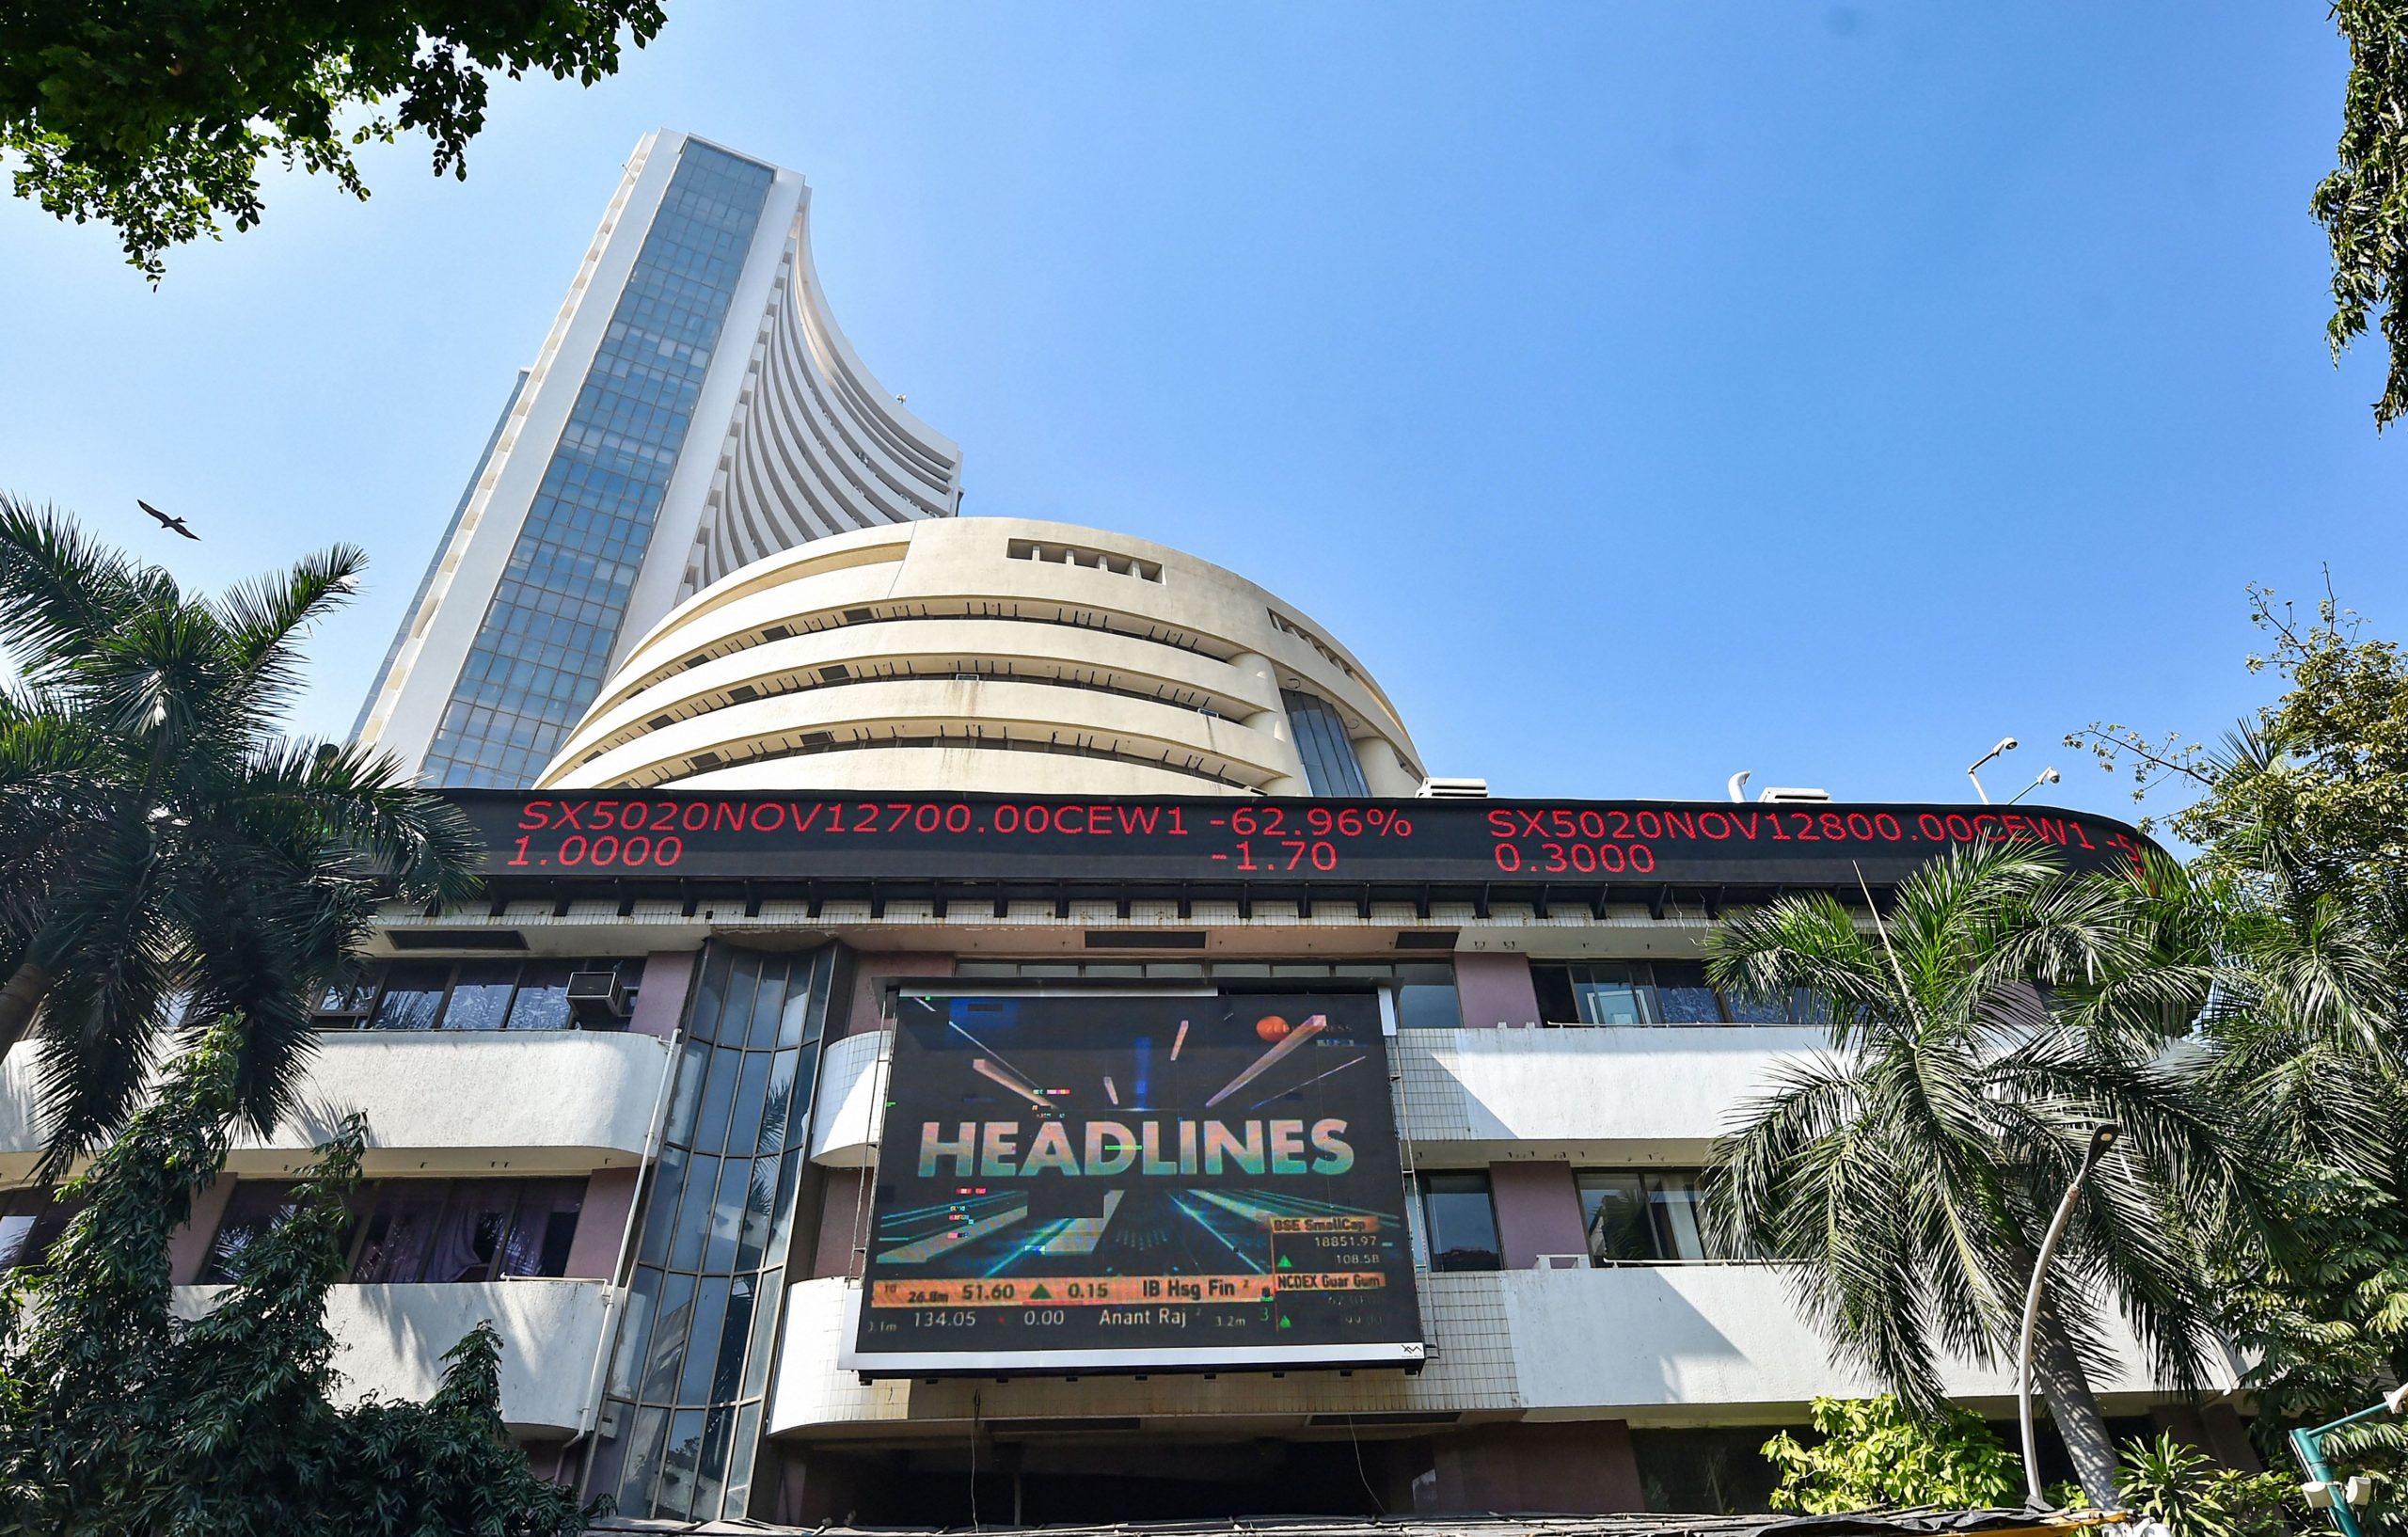 Trending Stocks: Coal India, Future Retail, Eicher, BHEL, RIL and others in news today